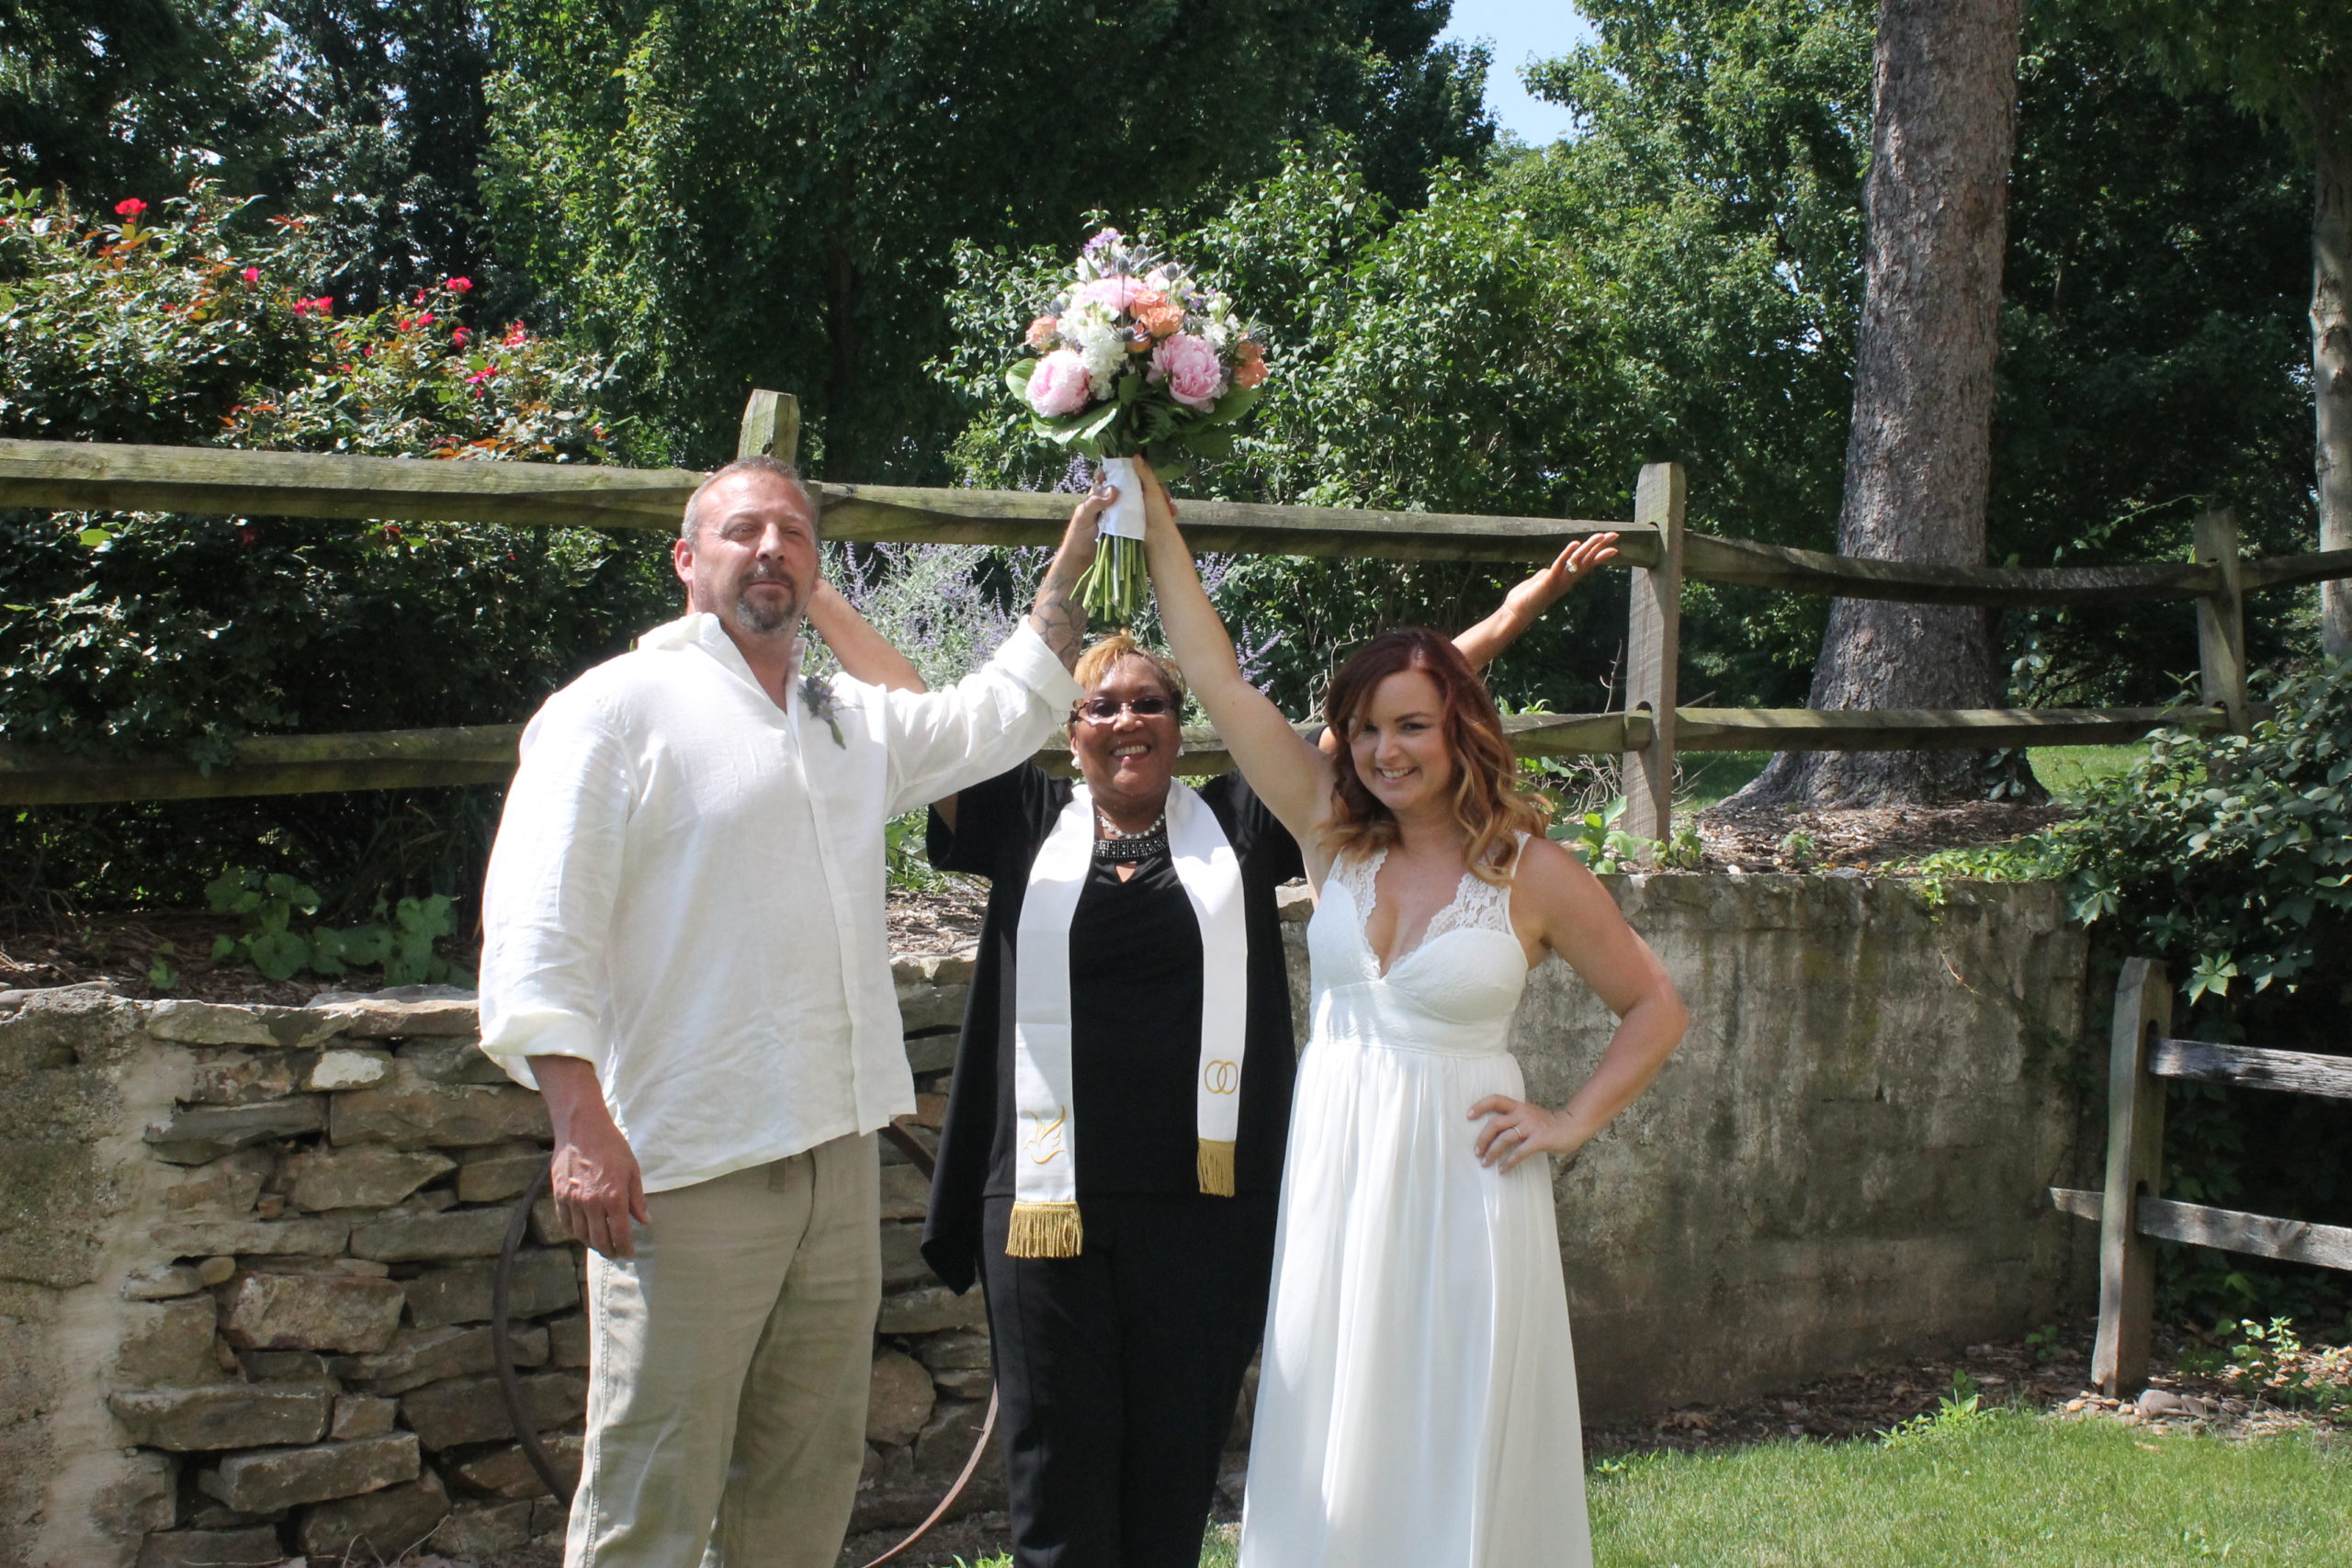 A wedding officiant posing for a picture with a just married couple